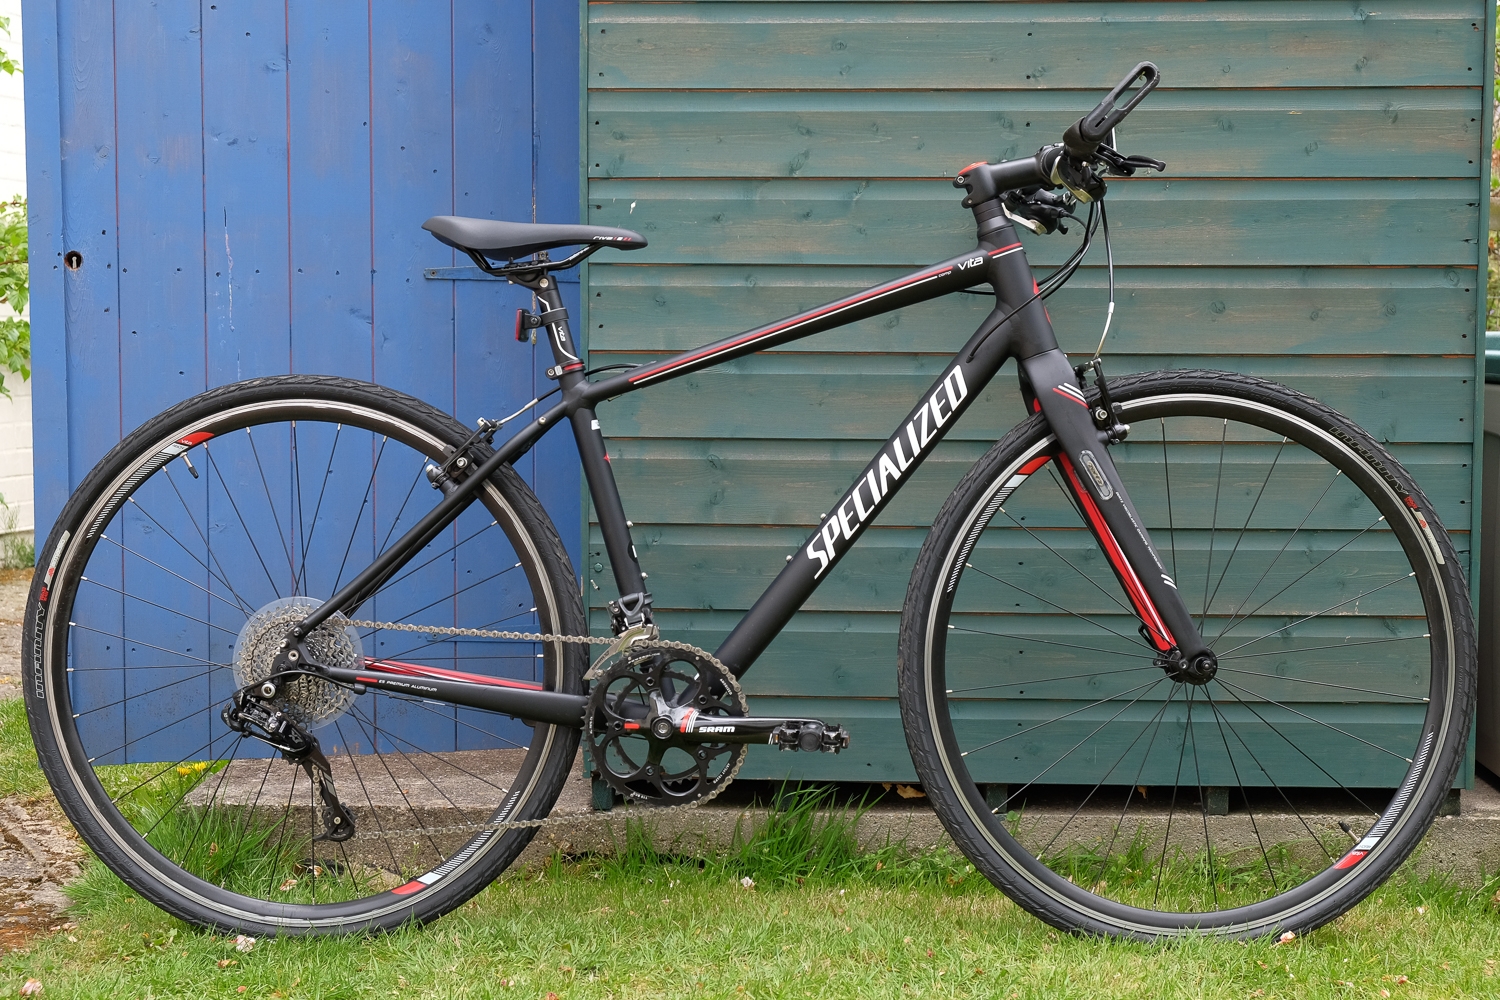 Lot 75 - Specialized Vita Comp 2013. Women’s flat bar road bike. Weighs approx 10kg. Medium frame. - Sold for £190